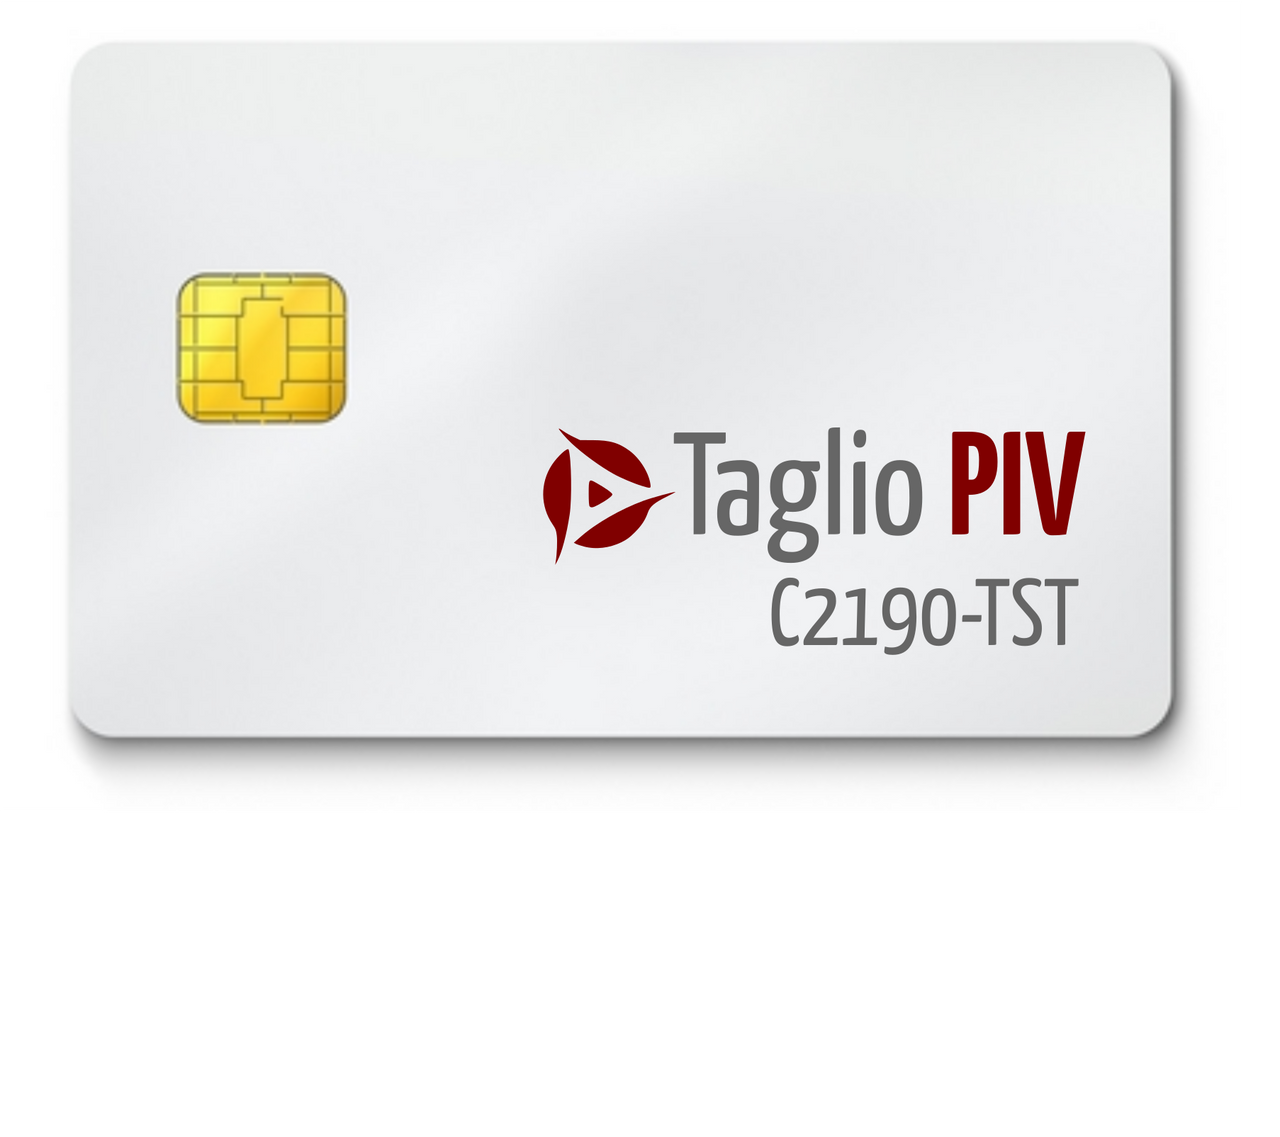 hail Get acquainted linkage Taglio PIV Card C2190 with Test Certificates - PIVKey